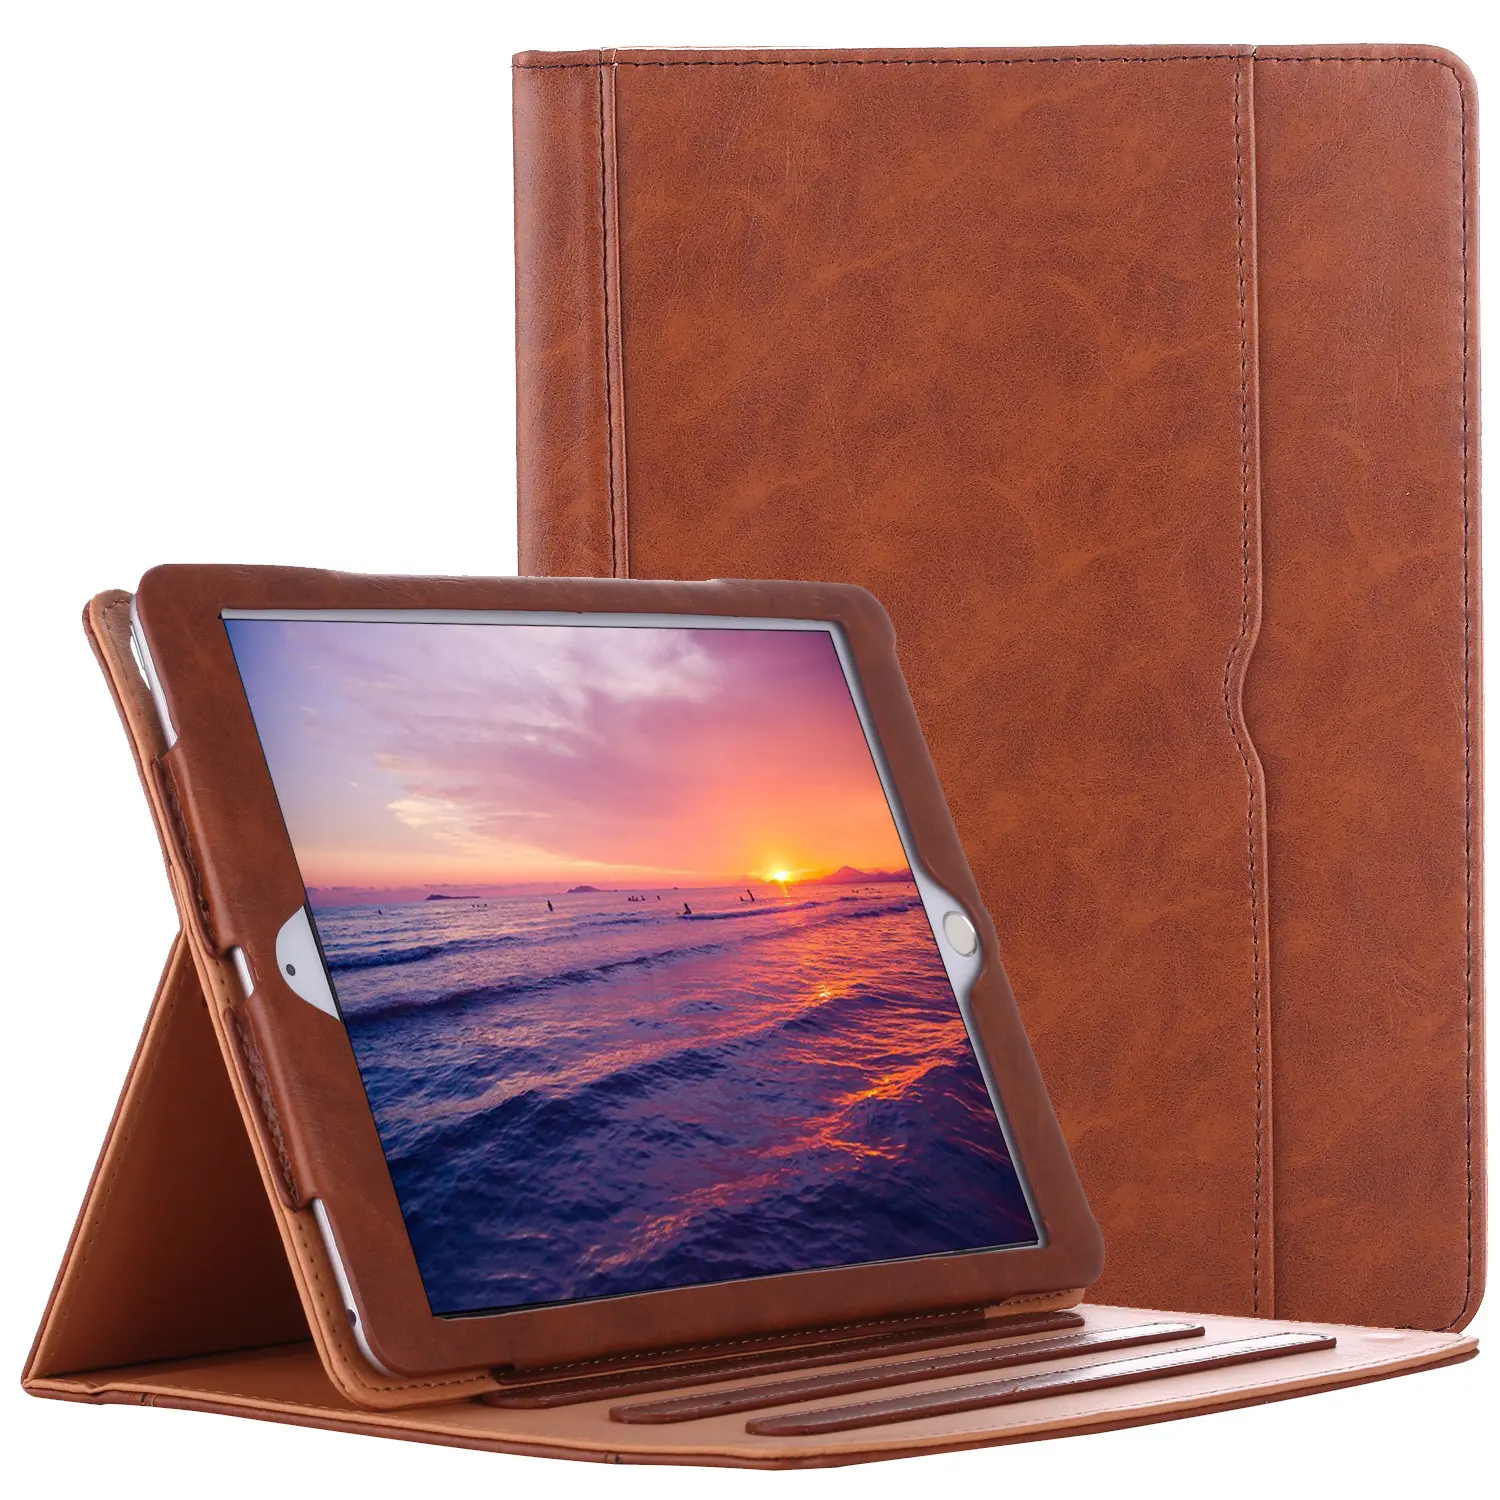 Leather Case For ipad air air2 Premium Leather Business Folio Stand Cover with Built-in Apple Pencil Holder